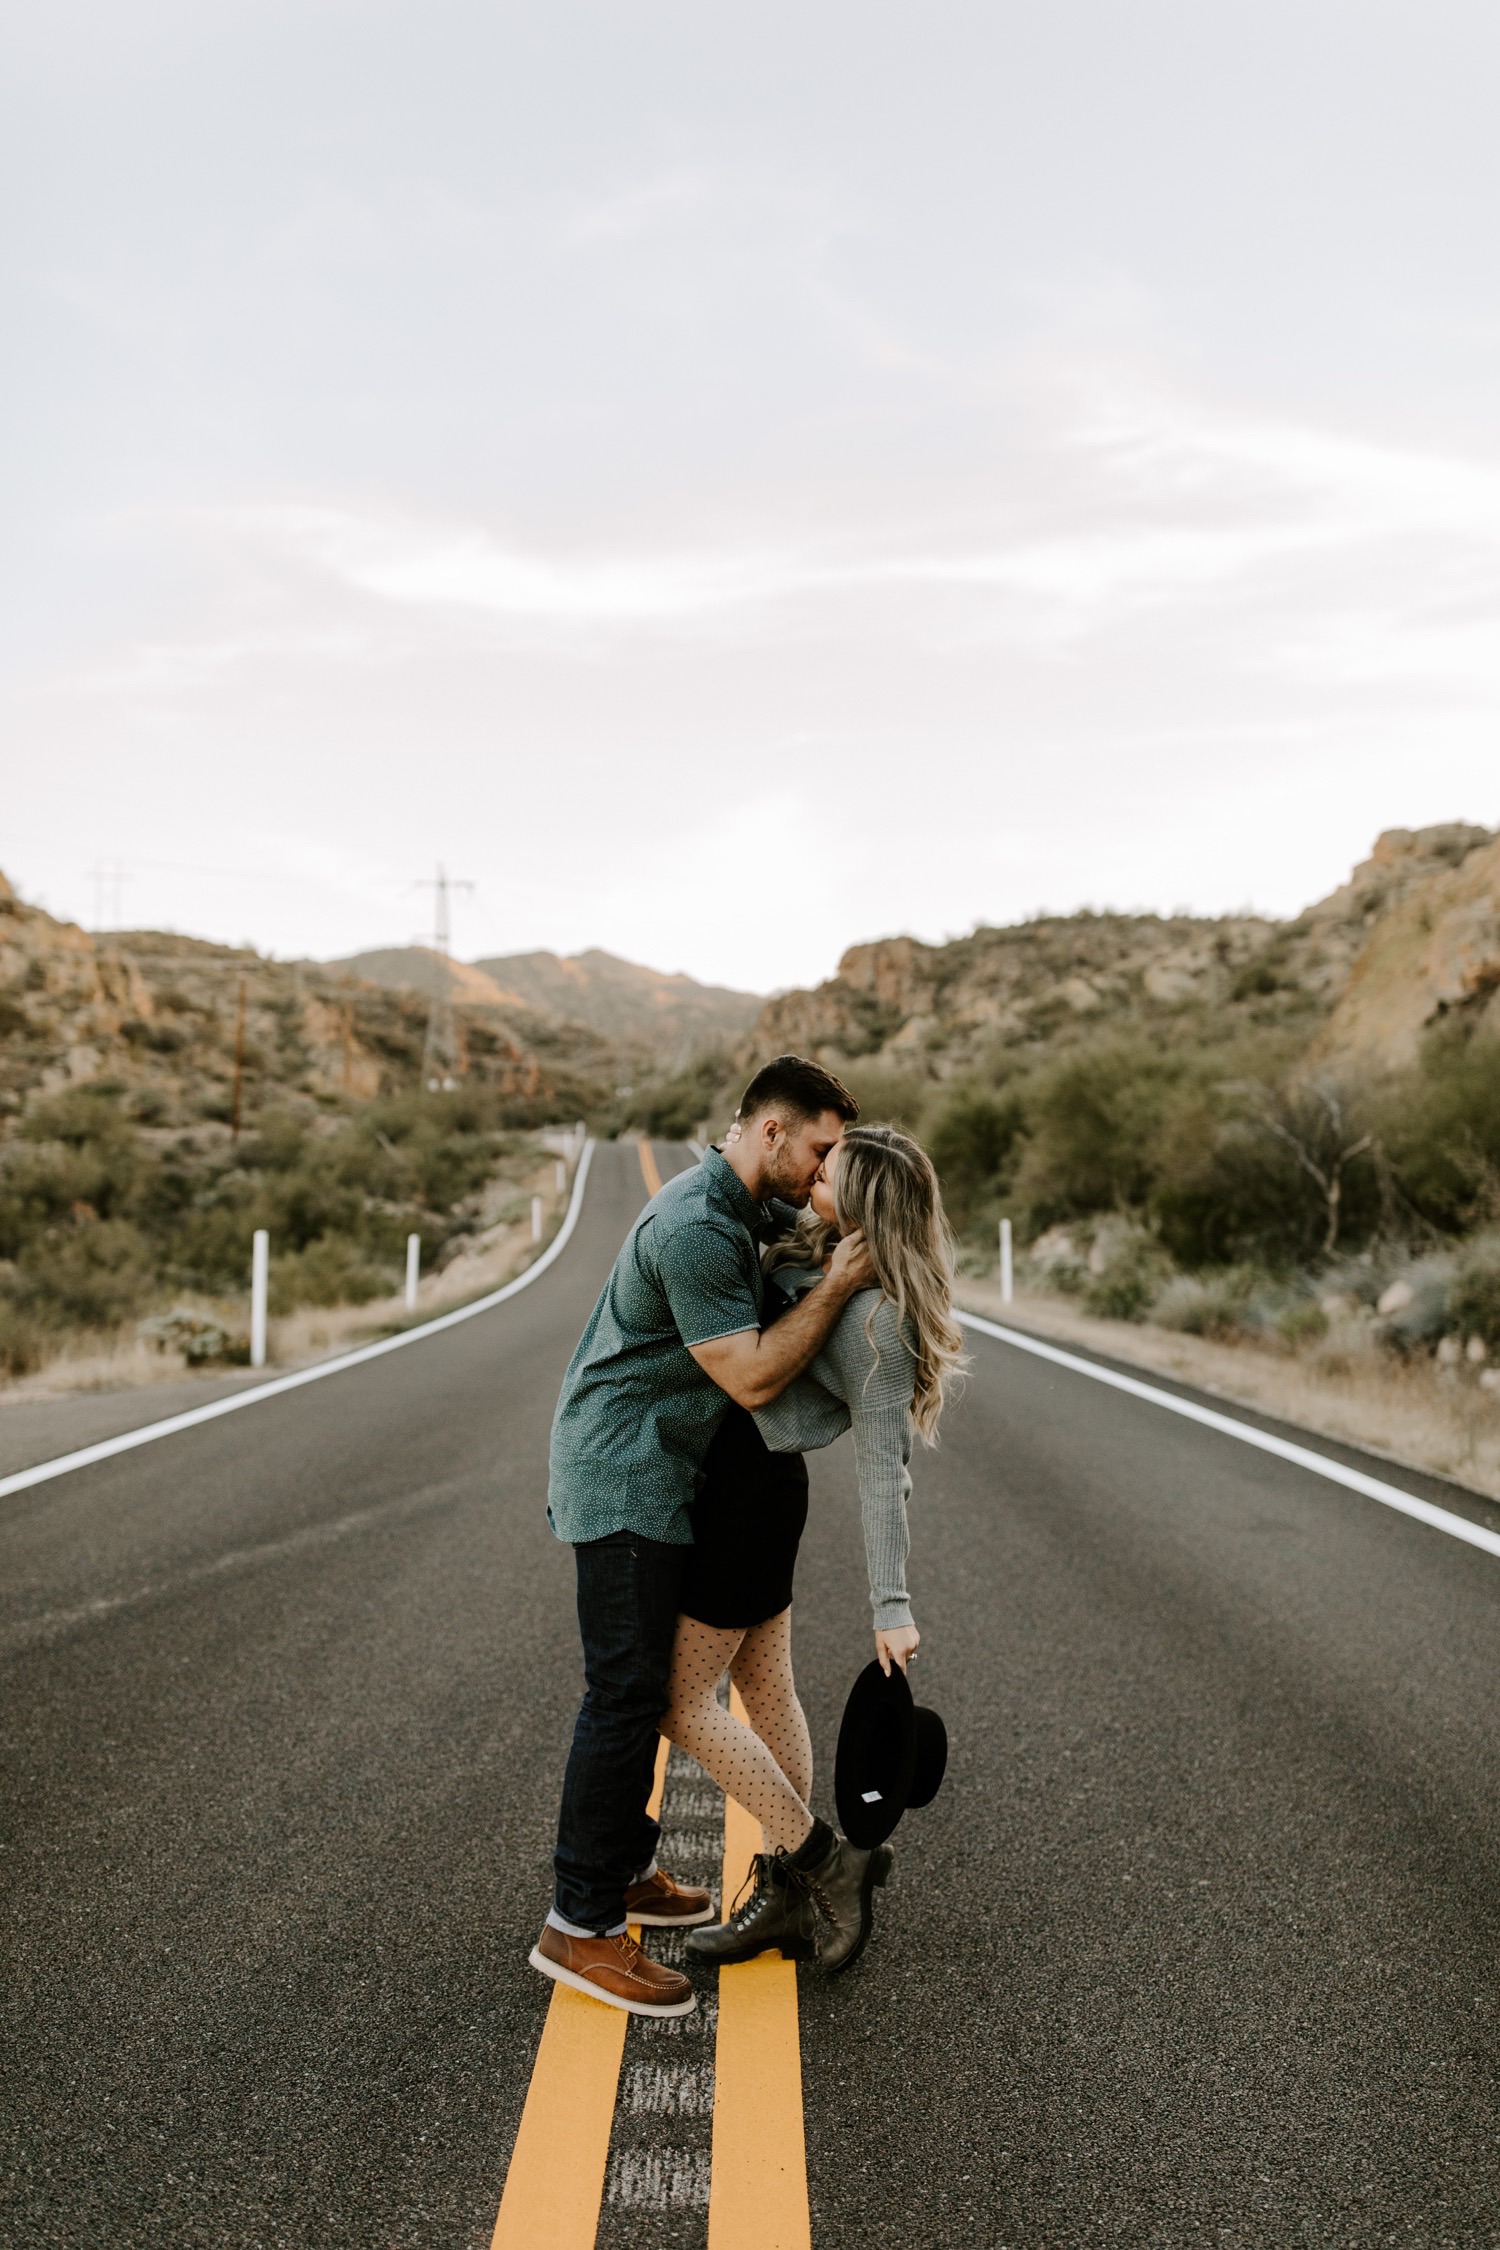 This couple is kissing in the middle of the road in the desert of Arizona